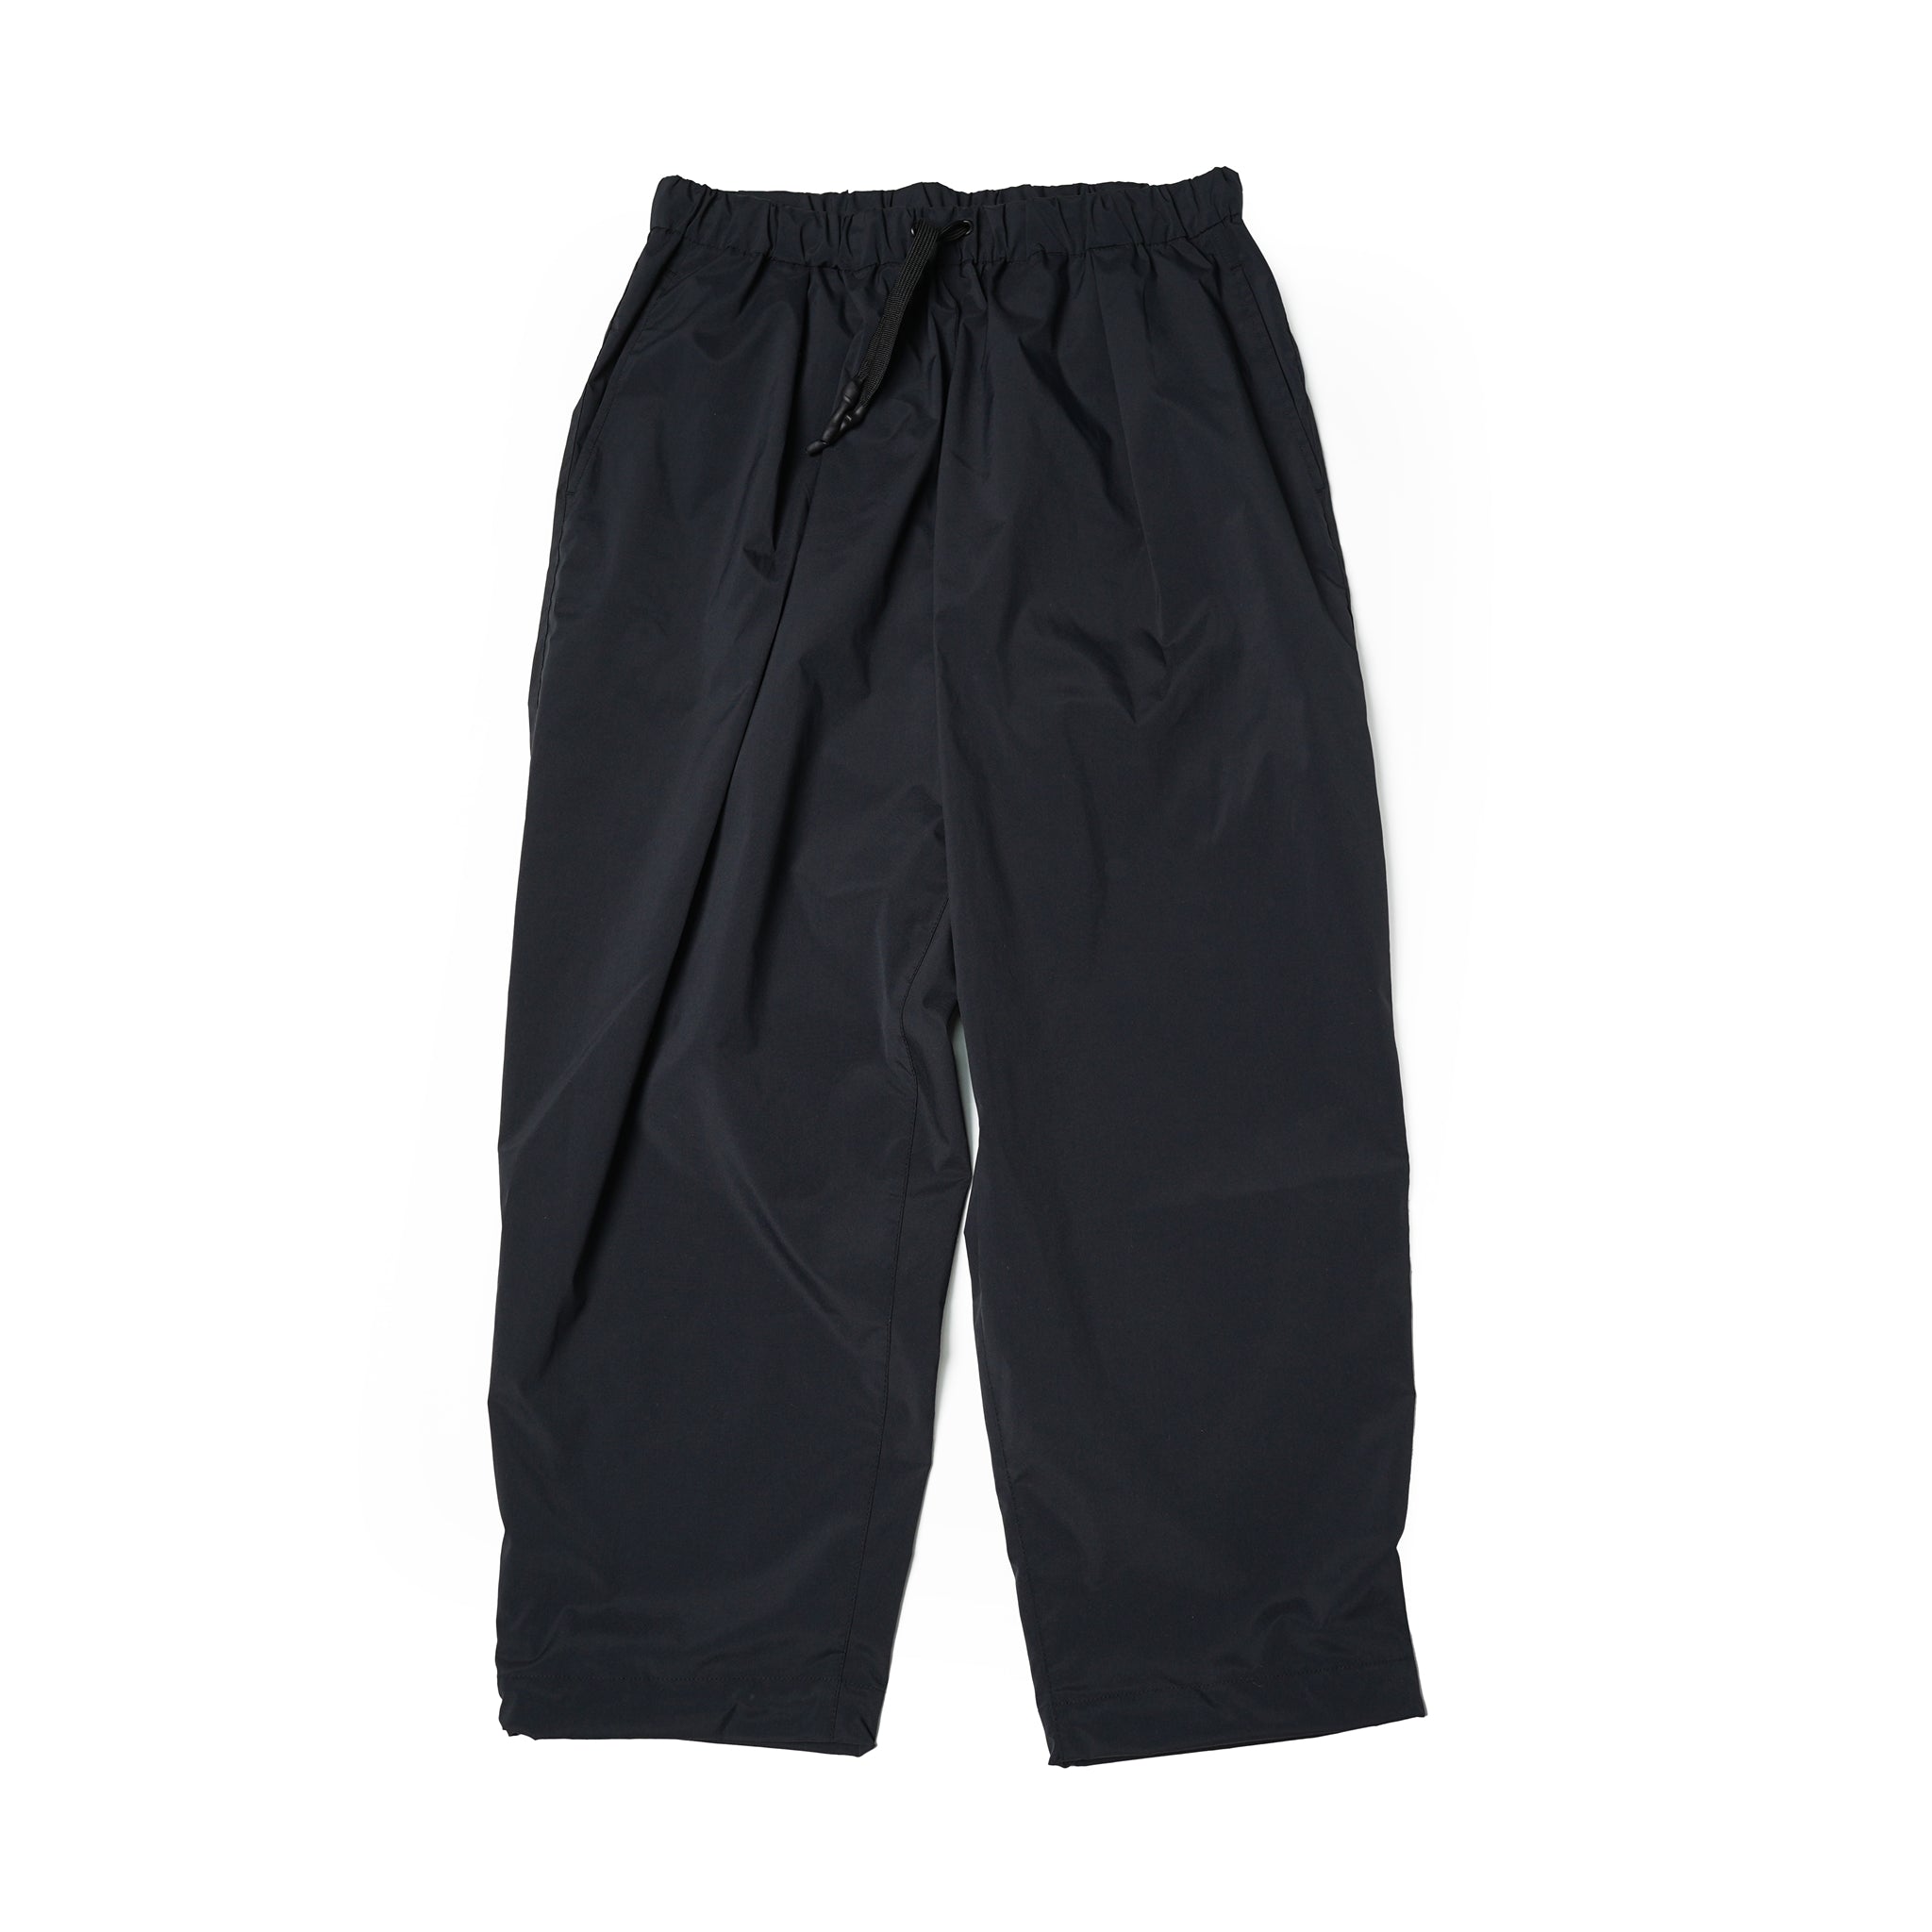 No:UN-014_AW23 | Name:WATER REPELLENT TAPERED STRETCH TRACK PANTS | Color:Black【UNTRACE_アントレース】